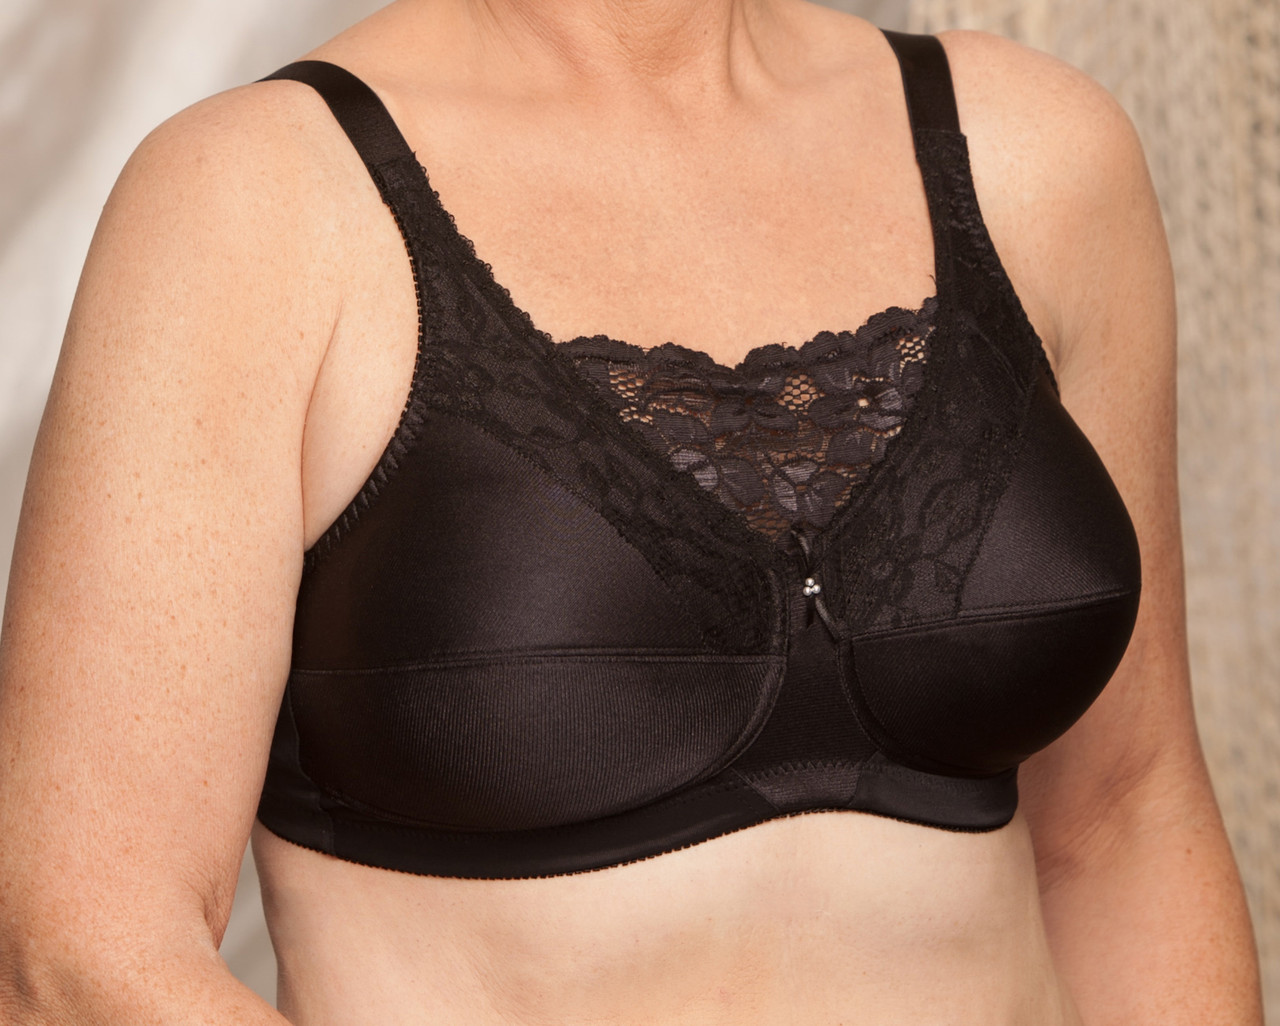 Buy Nearly Me 670 Lace Front Closure Mastectomy Bra